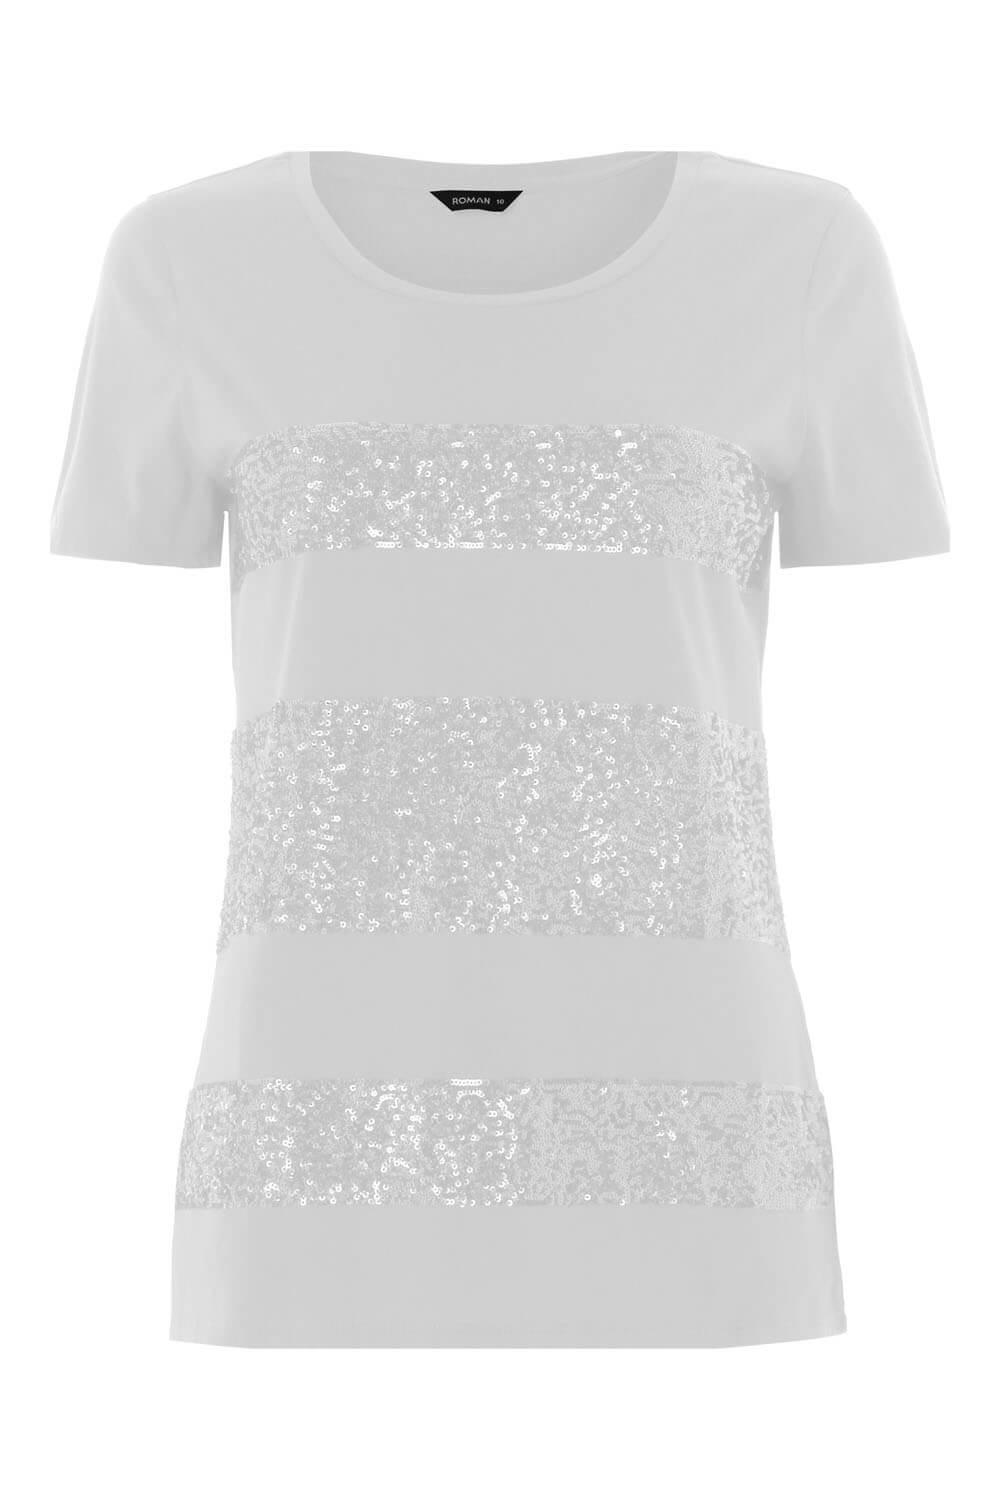 Ivory  Sequin Stripe T-Shirt Top, Image 5 of 5